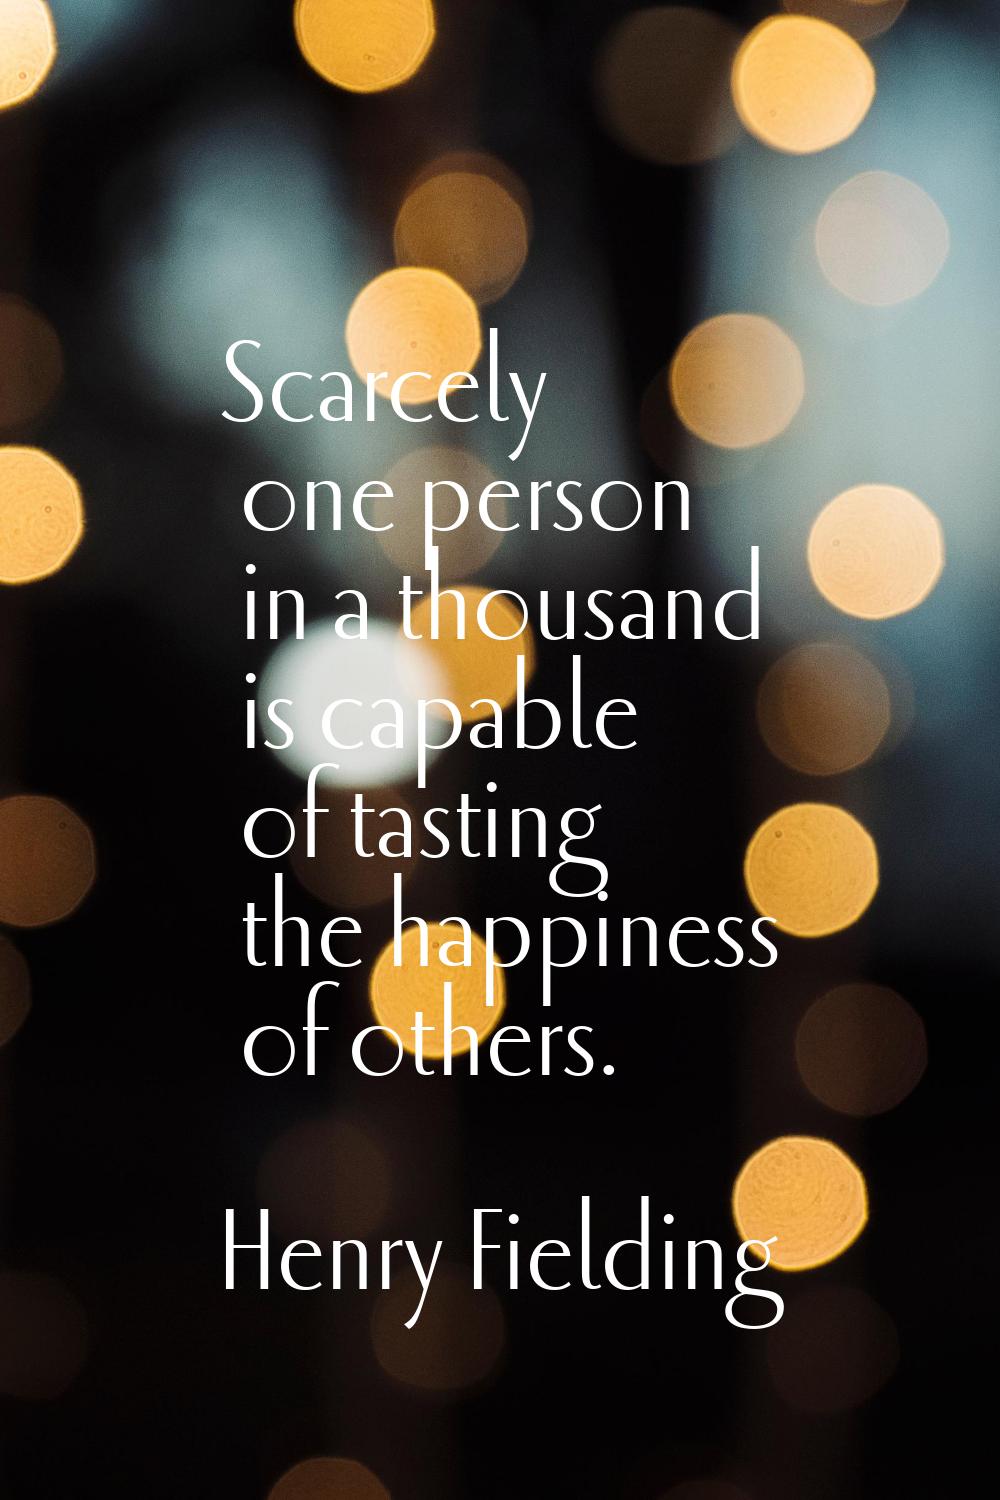 Scarcely one person in a thousand is capable of tasting the happiness of others.